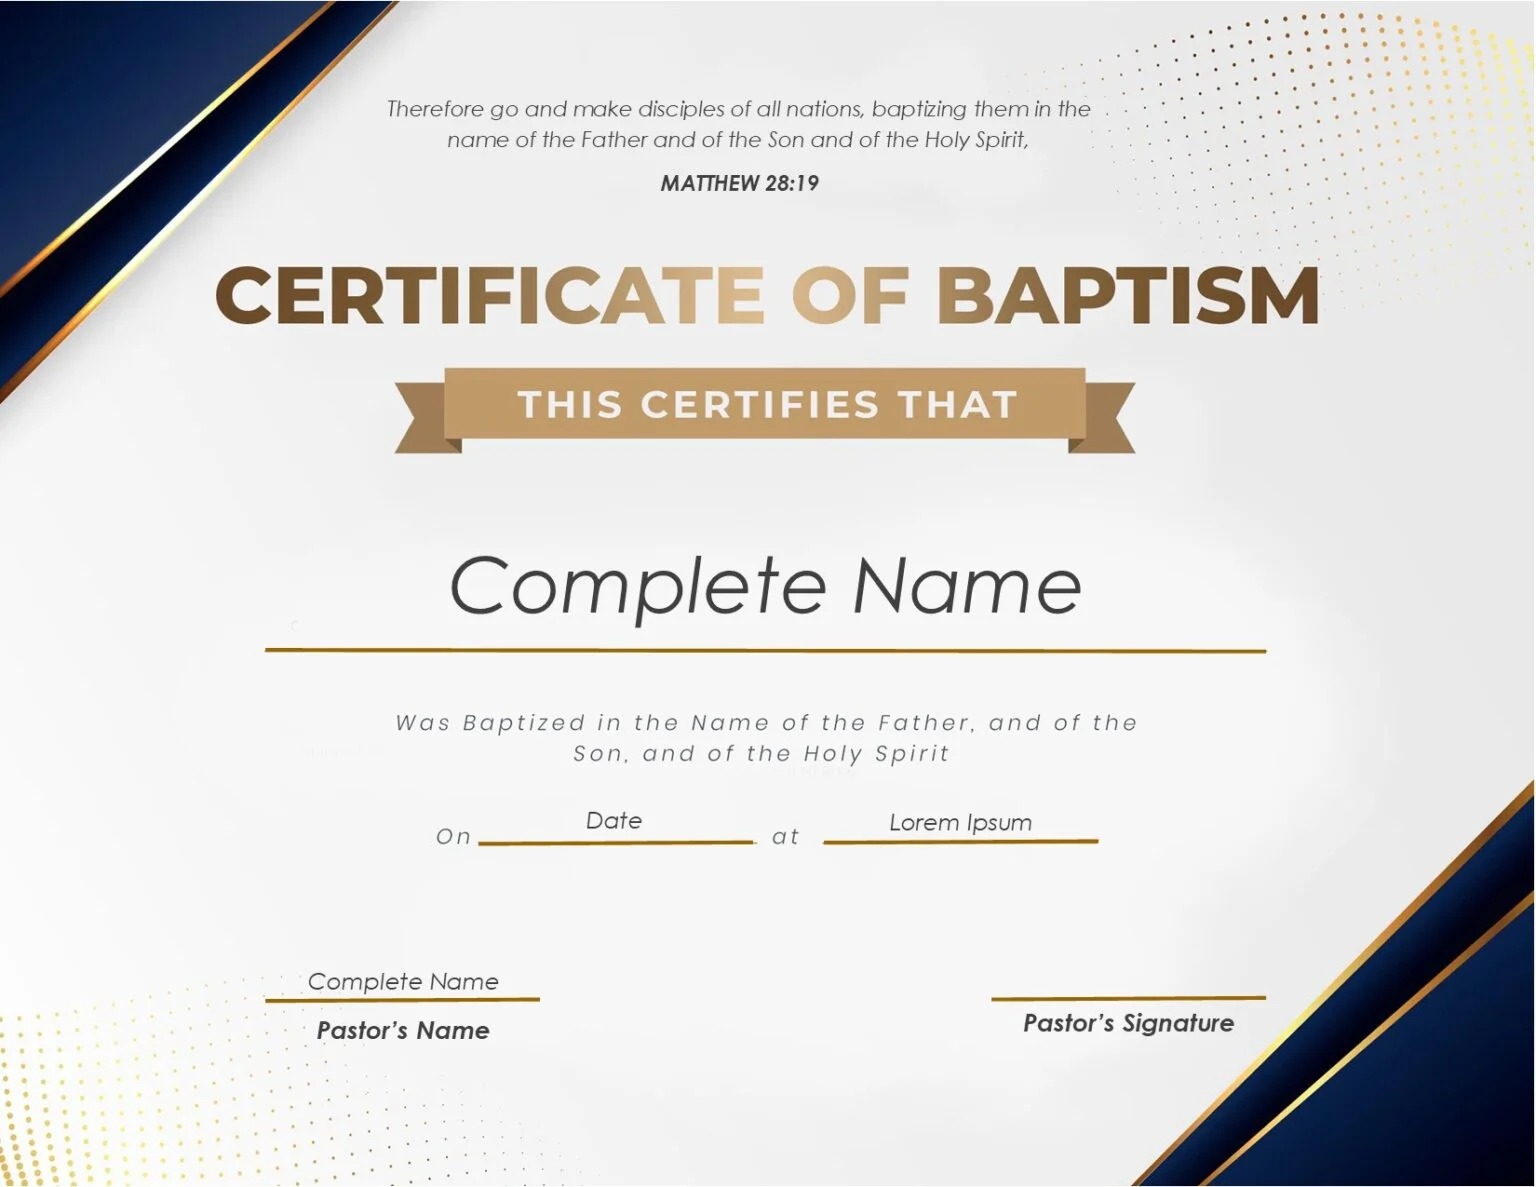 Baptismal Certificate - Free Baptism Certificate Template 2 by Ministry Voice